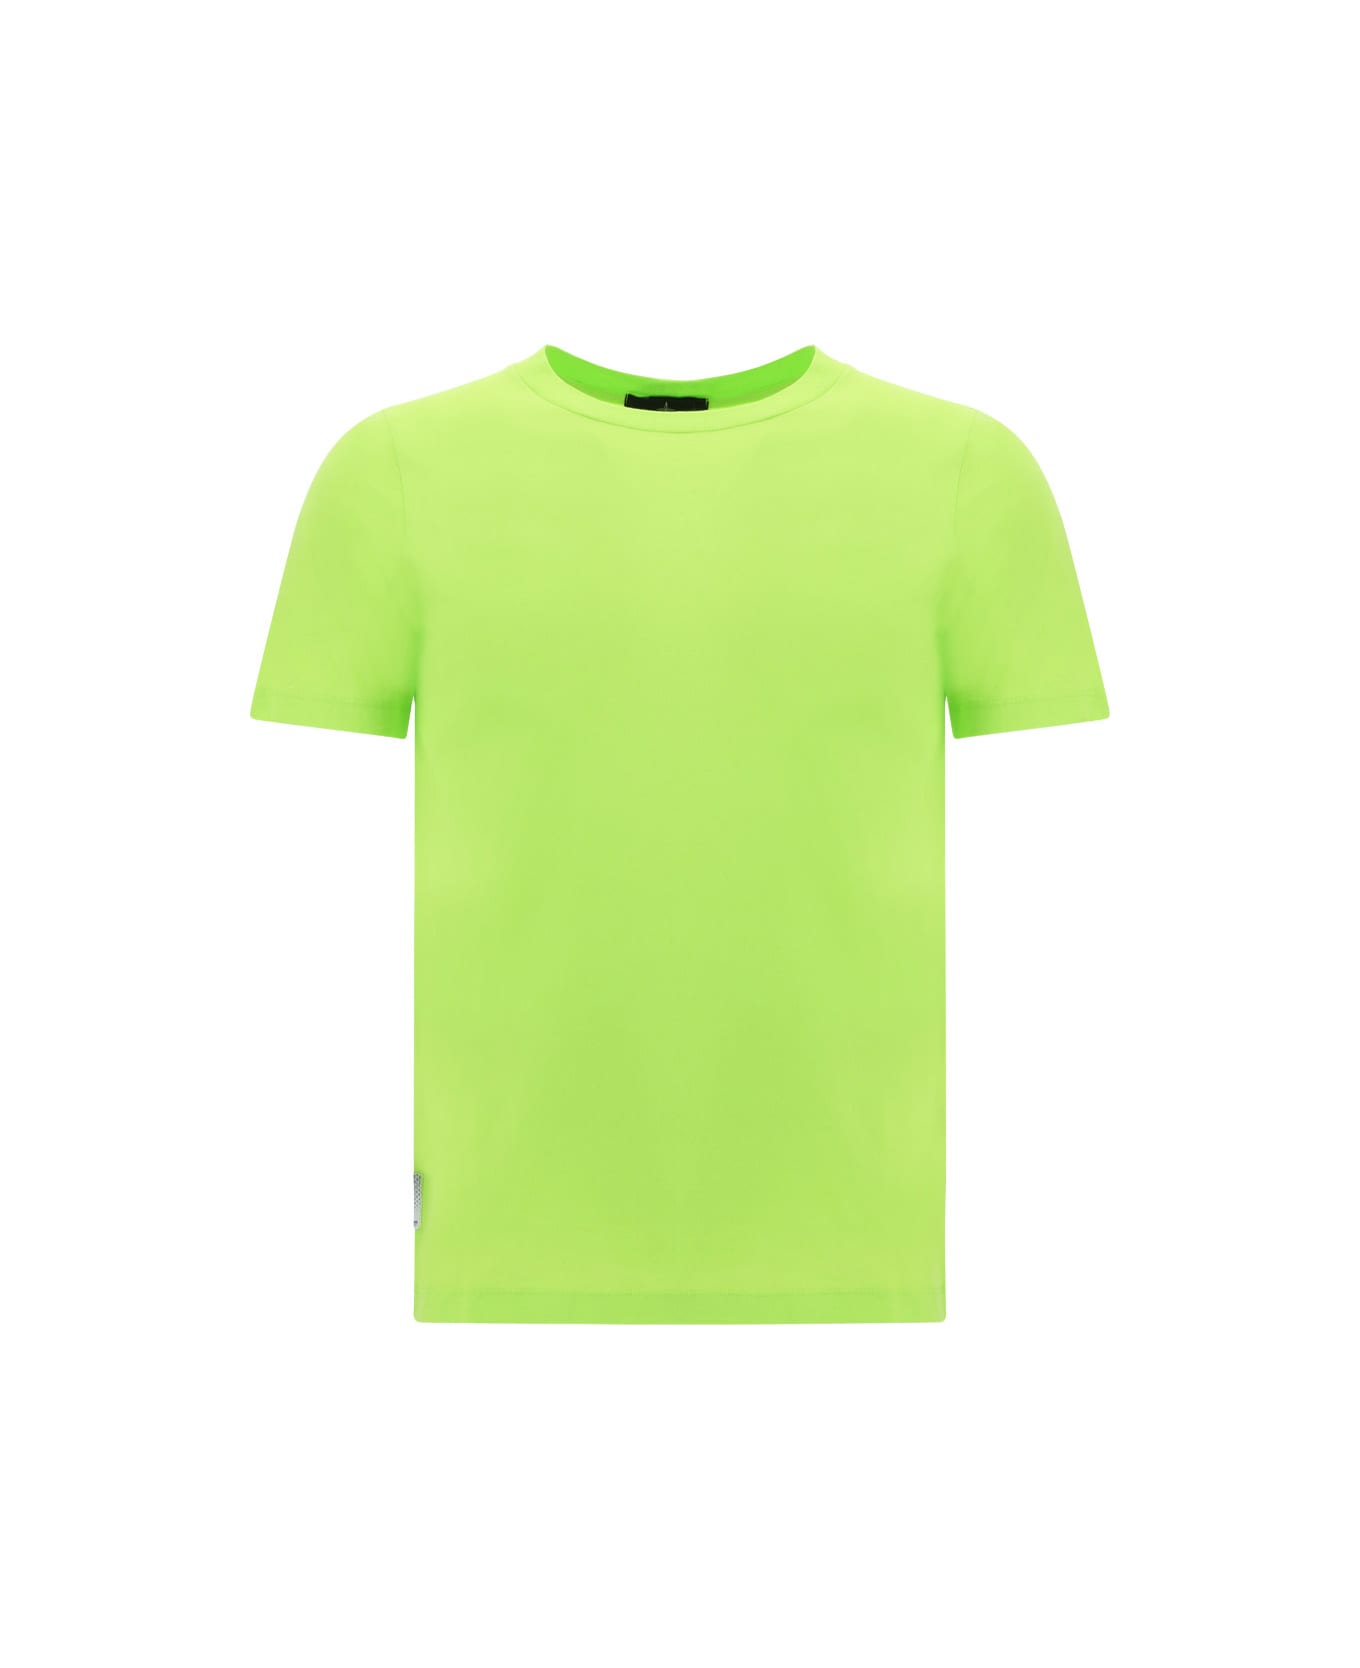 Stone Island Shadow Project T-shirt - GIALLO